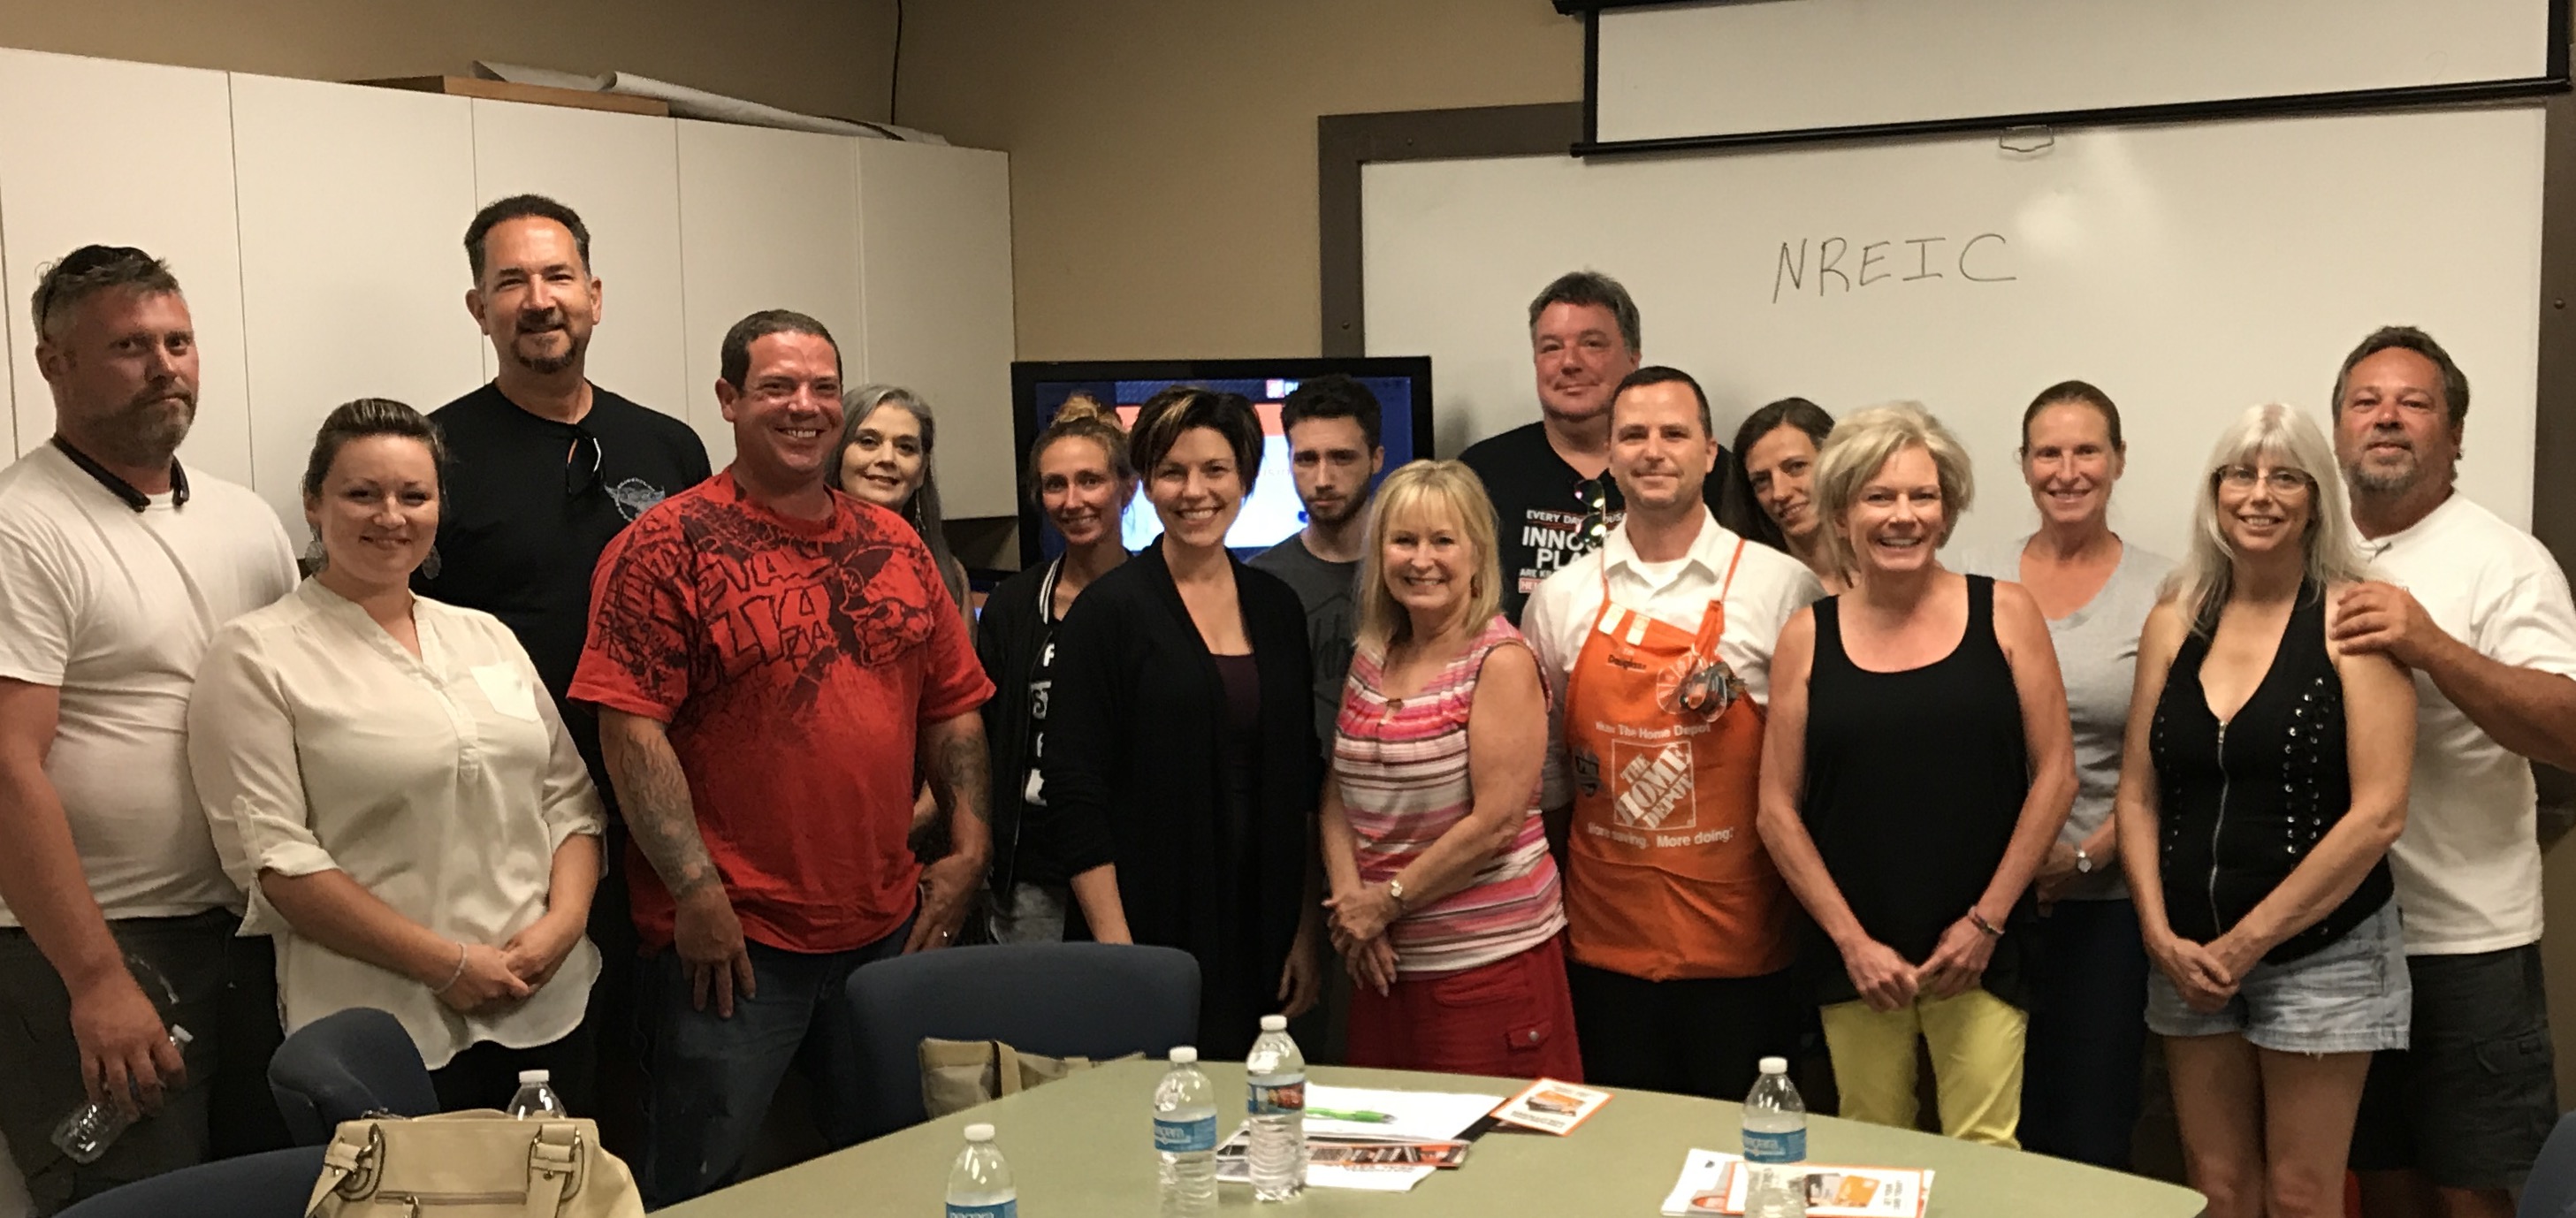 July's Mystery Meeting was training by Home Depot's Prodesk